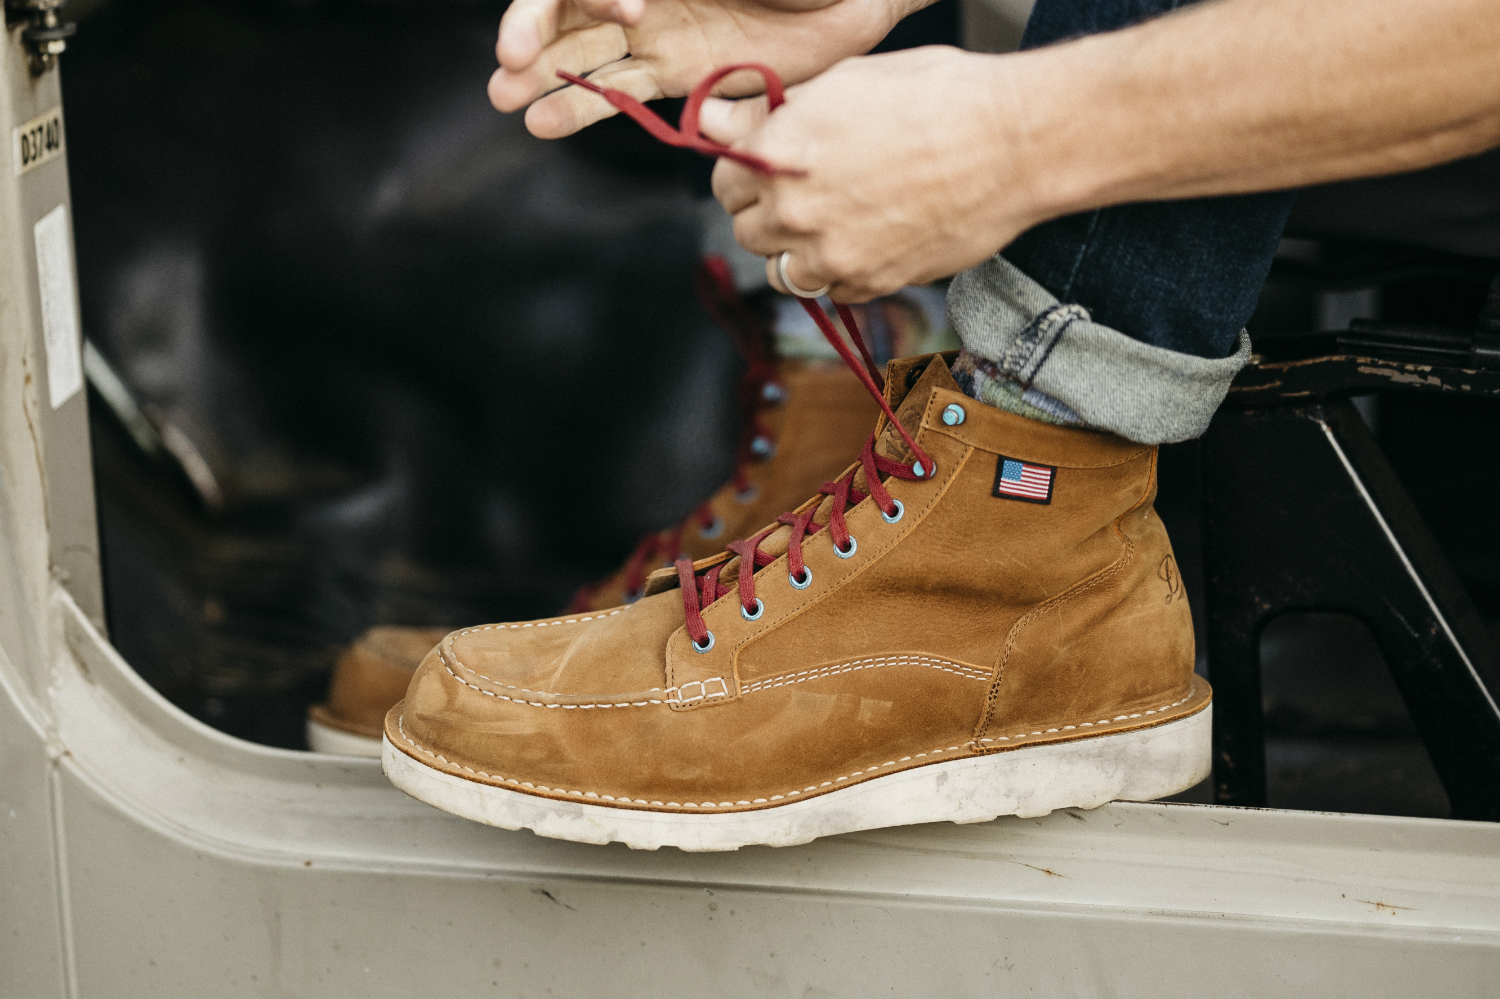 Go Off-Trail in Style with the New Danner Bull Run Lux Boots - The Manual